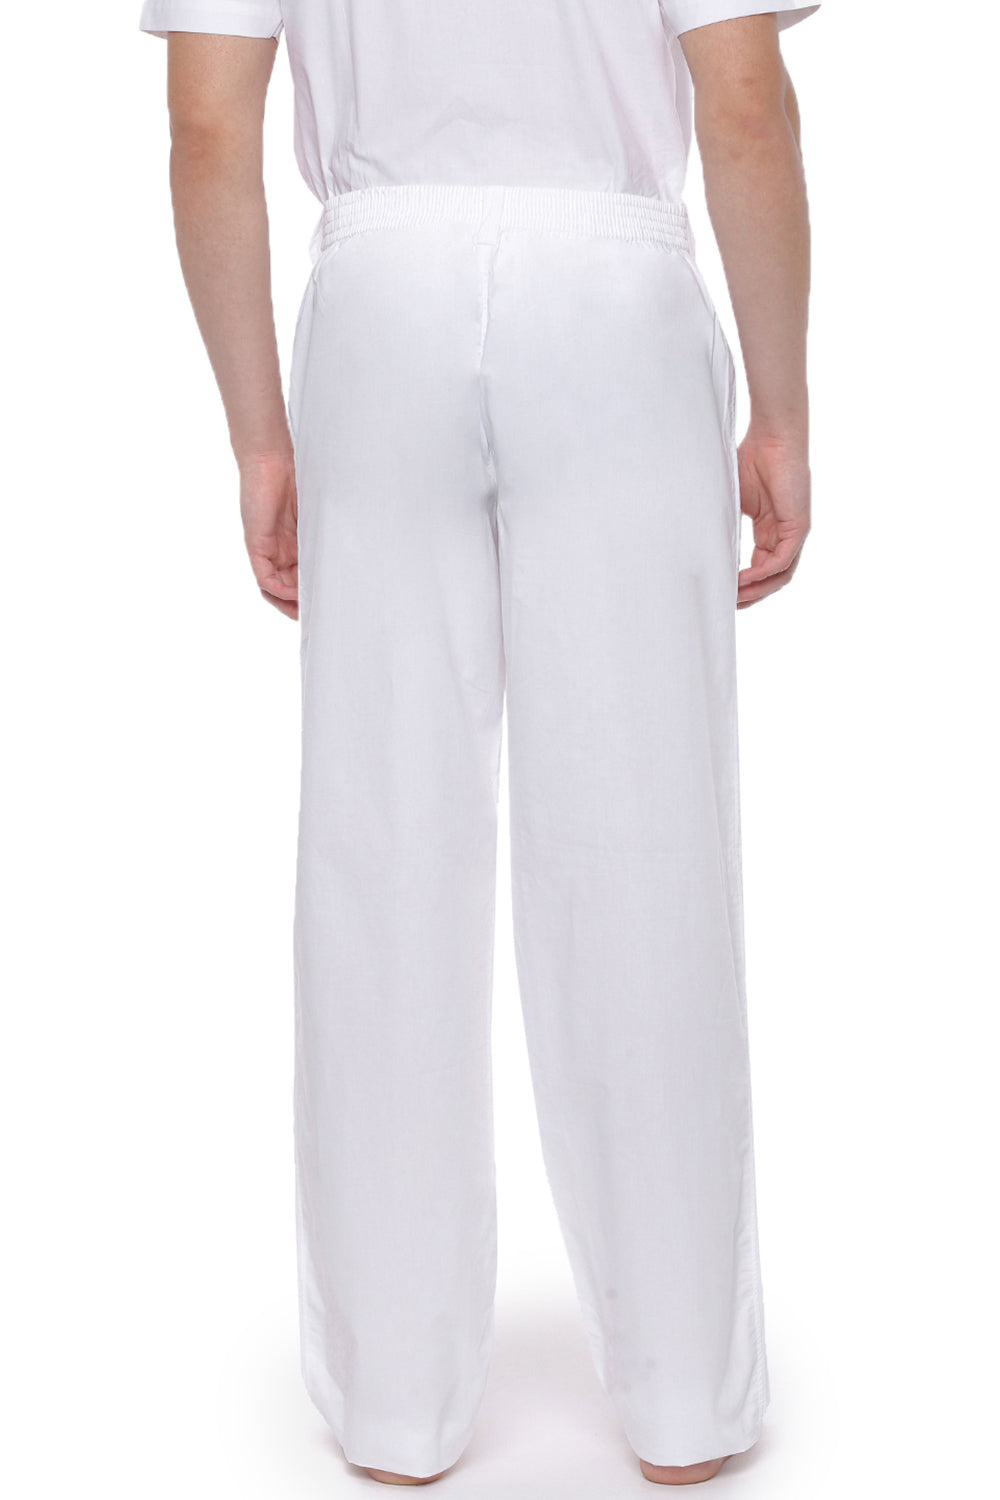 Amazonin Whites  Trousers  Men Clothing  Accessories